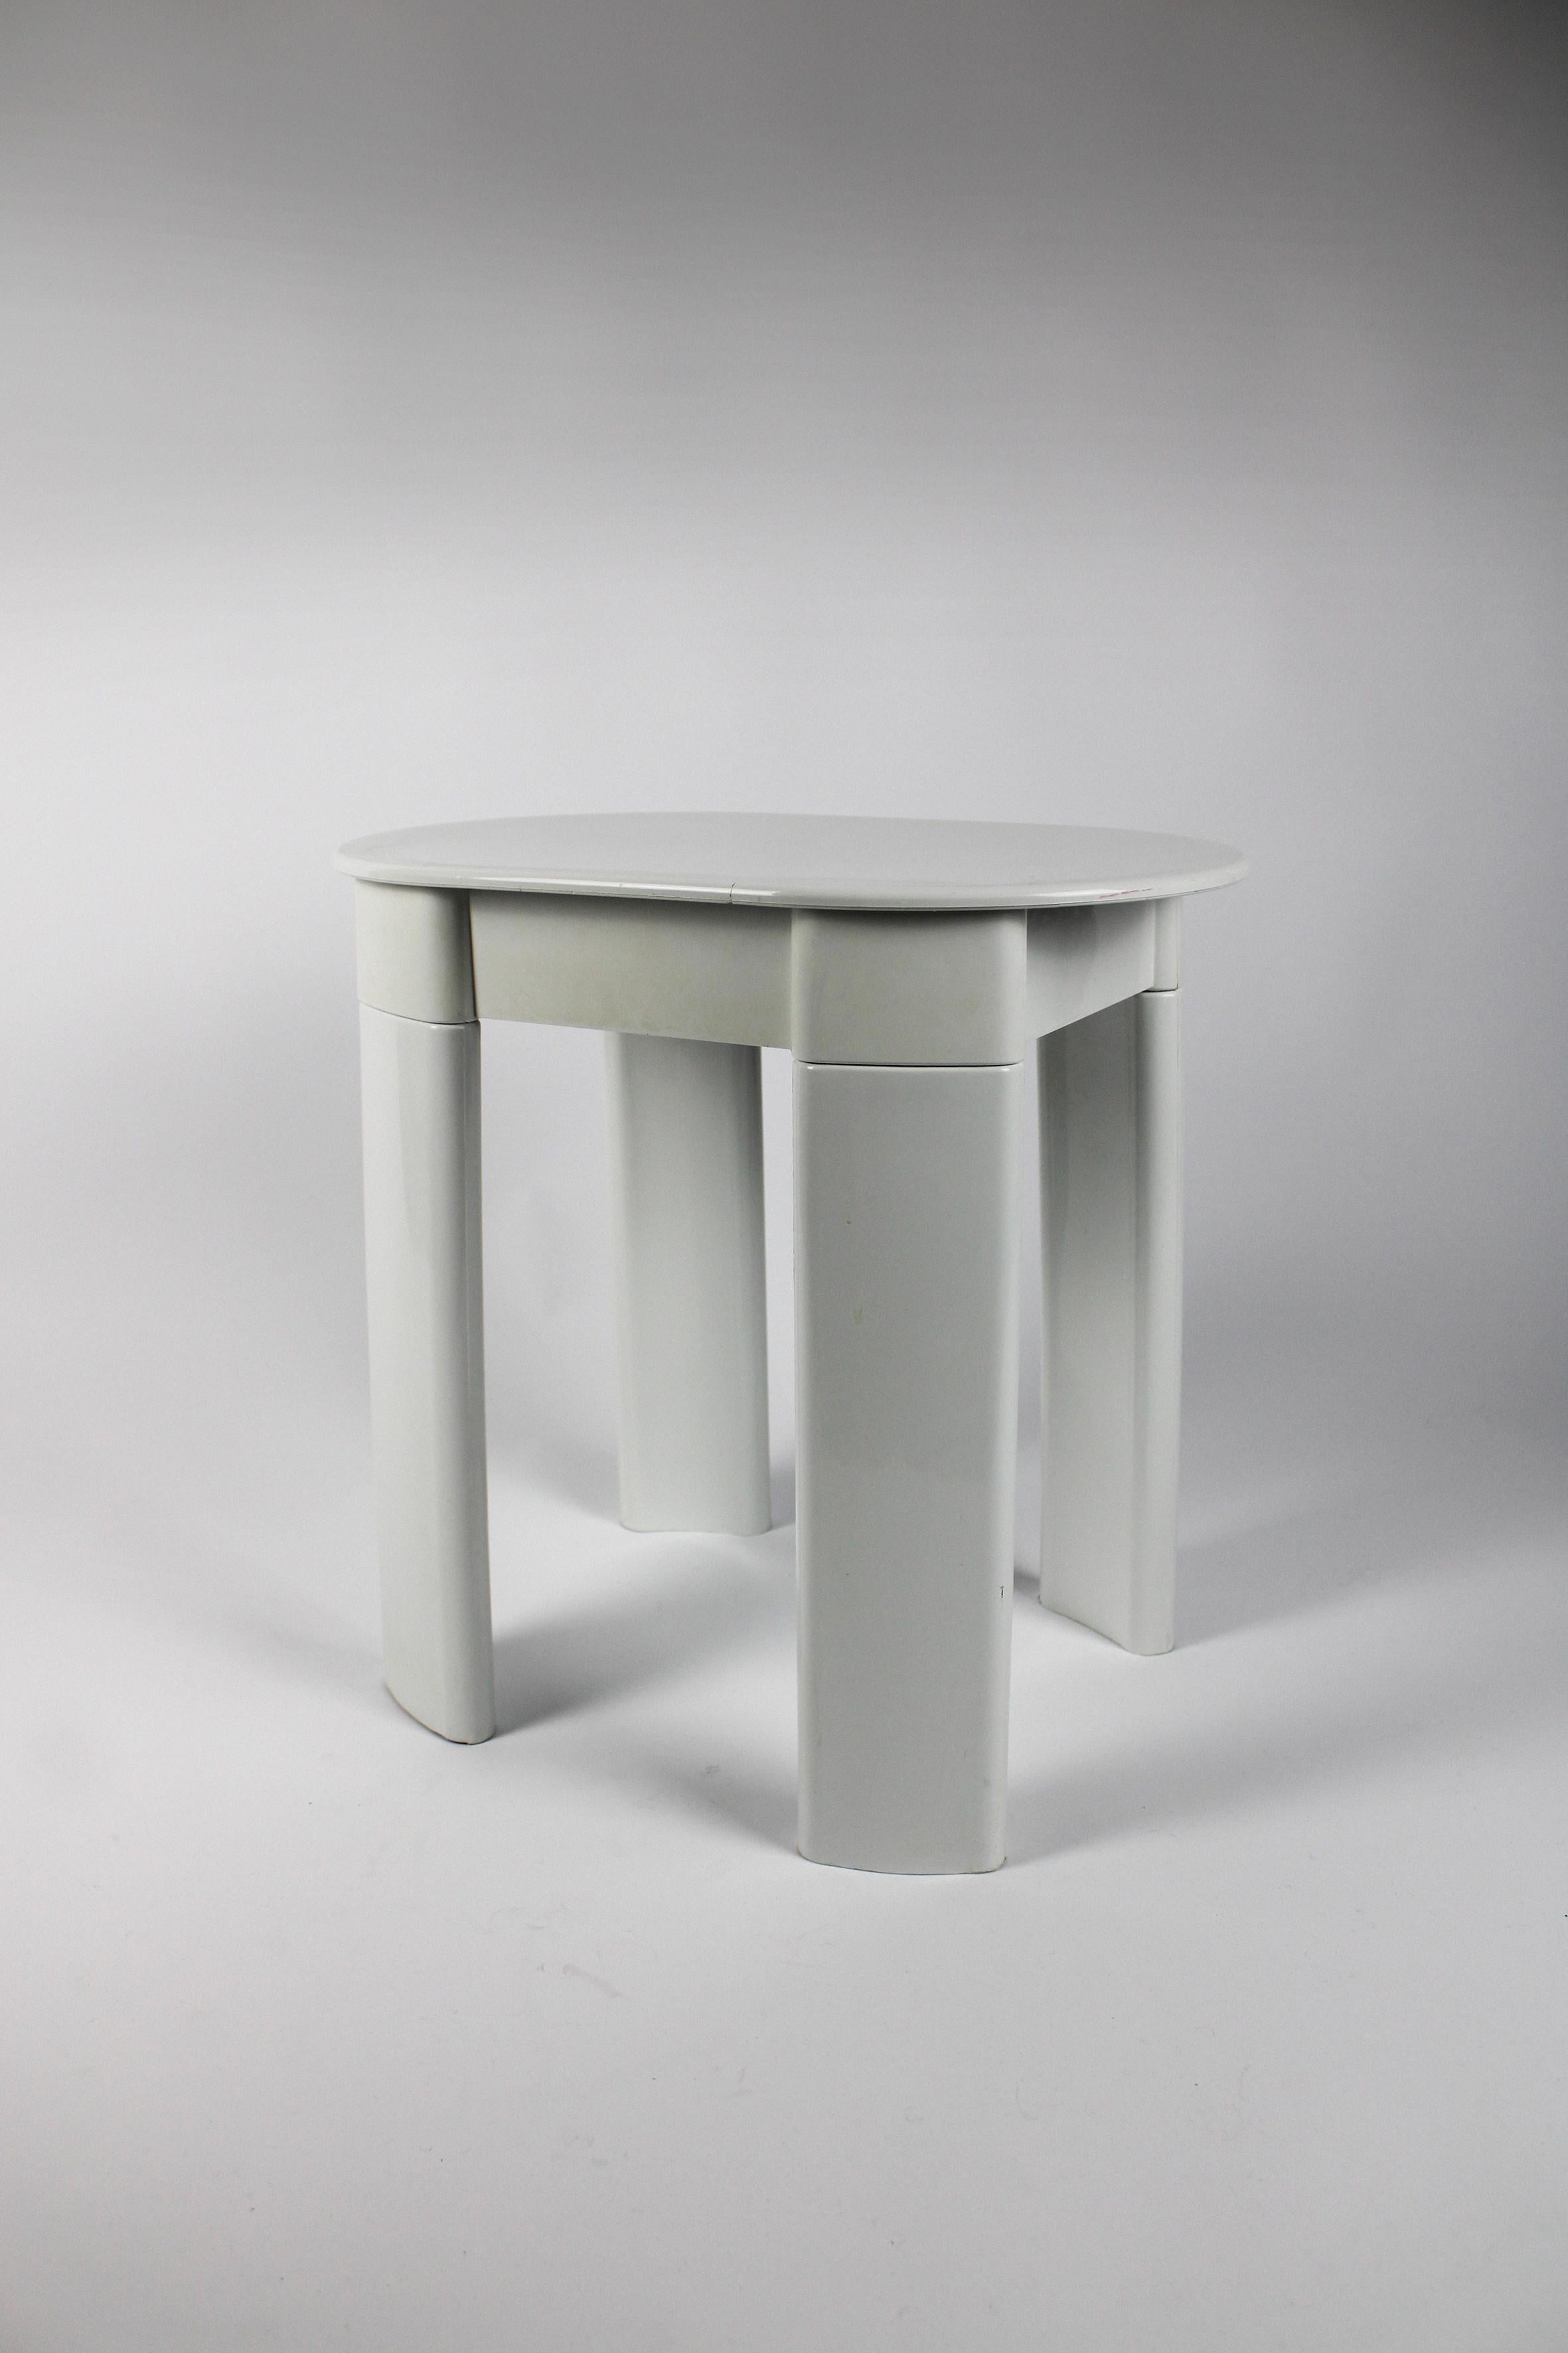 Infuse your home with charm using this attractive side table, characterized by its sleek yet playful design that instantly adds the perfect touch. Dating back to the 1970s, this space-age table is the brainchild of Olaf von Bohr, an Austrian